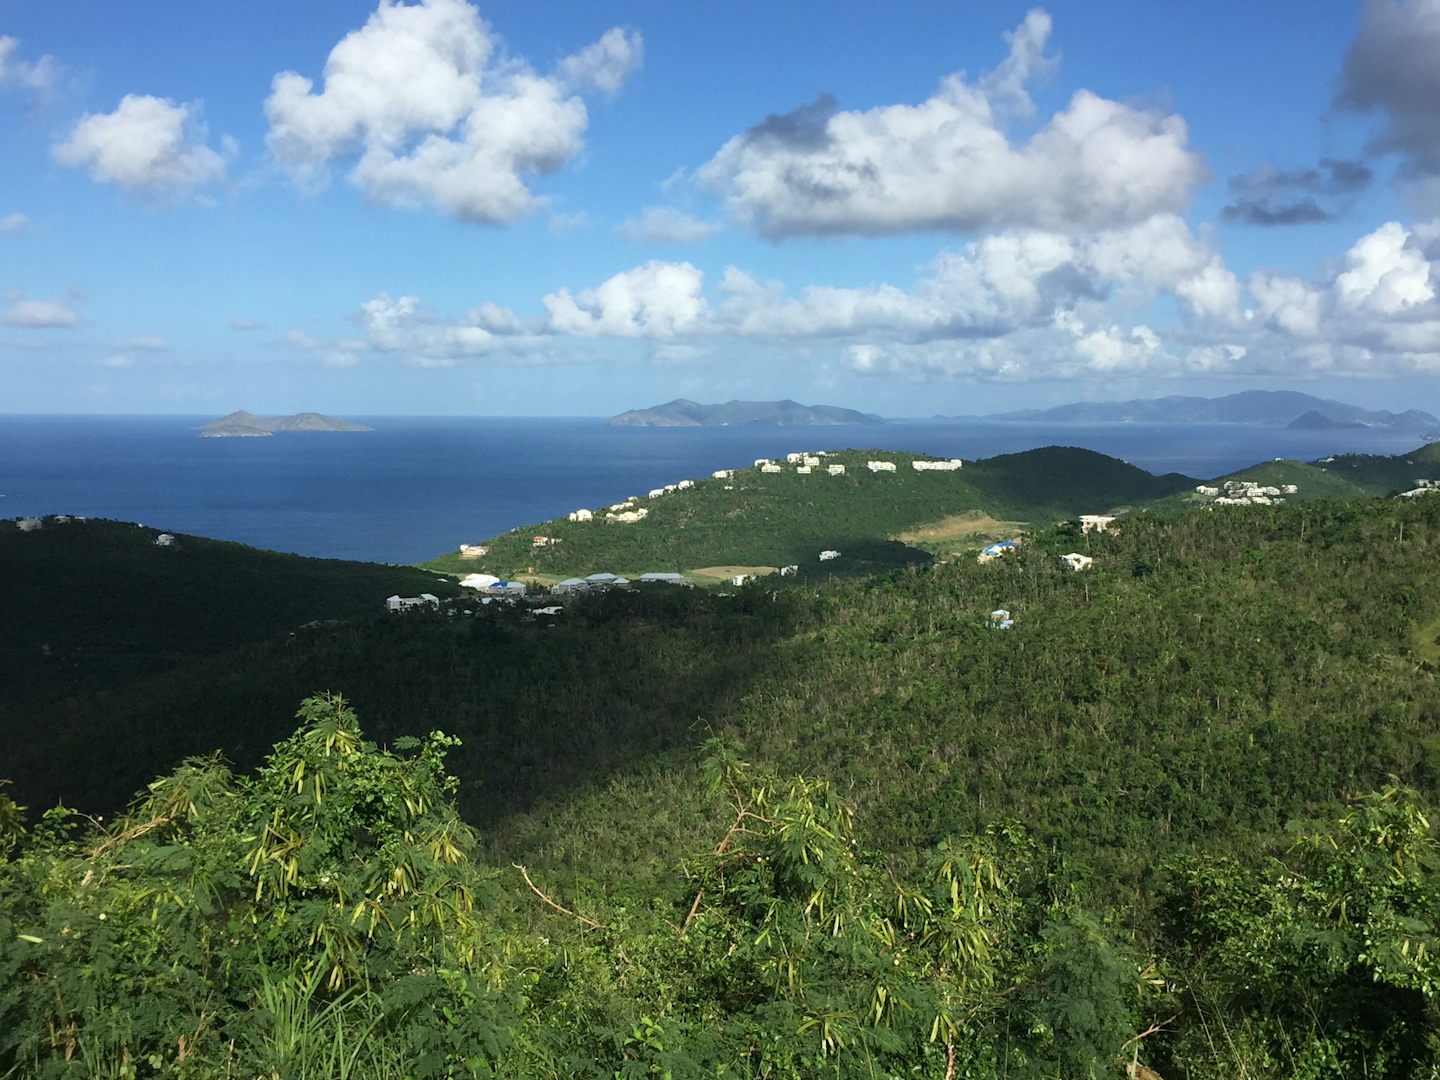 A beautiful view from the top of a hill in St. Kitts.